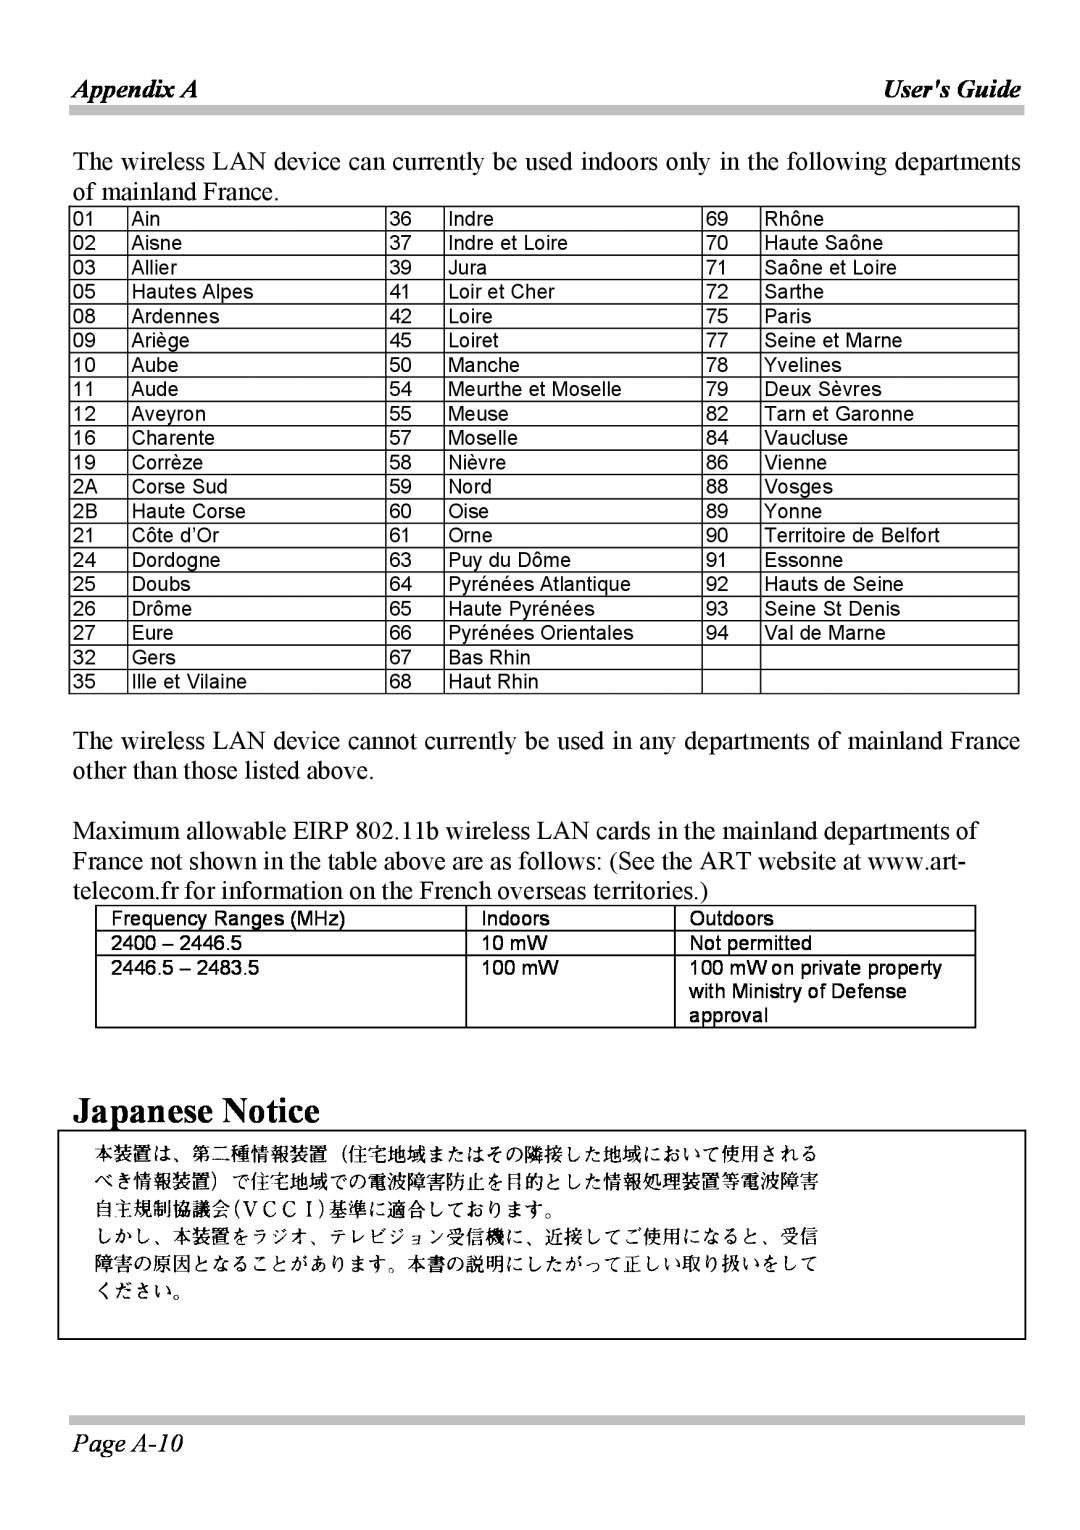 Microsoft W840DI manual Japanese Notice, Page A-10, Appendix A, Users Guide 